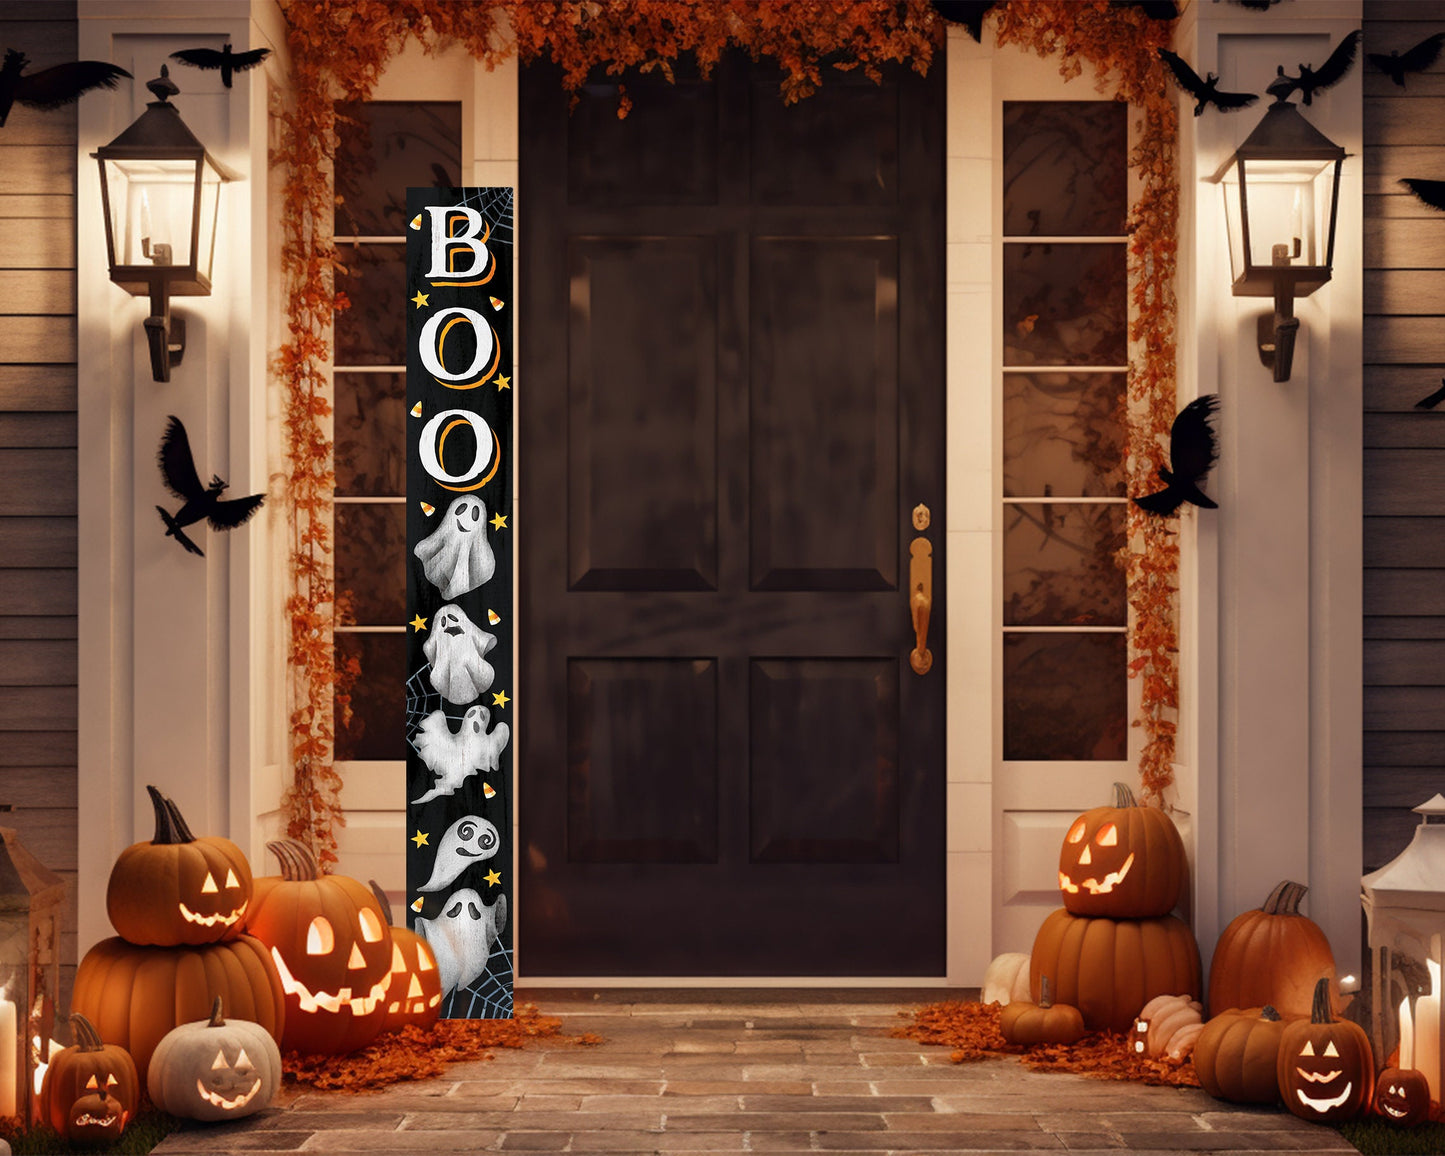 72in Wooden "BOO" Halloween Porch Sign with Ghost Pattern - Spooky Front Door Decor for Haunting Halloween Celebrations